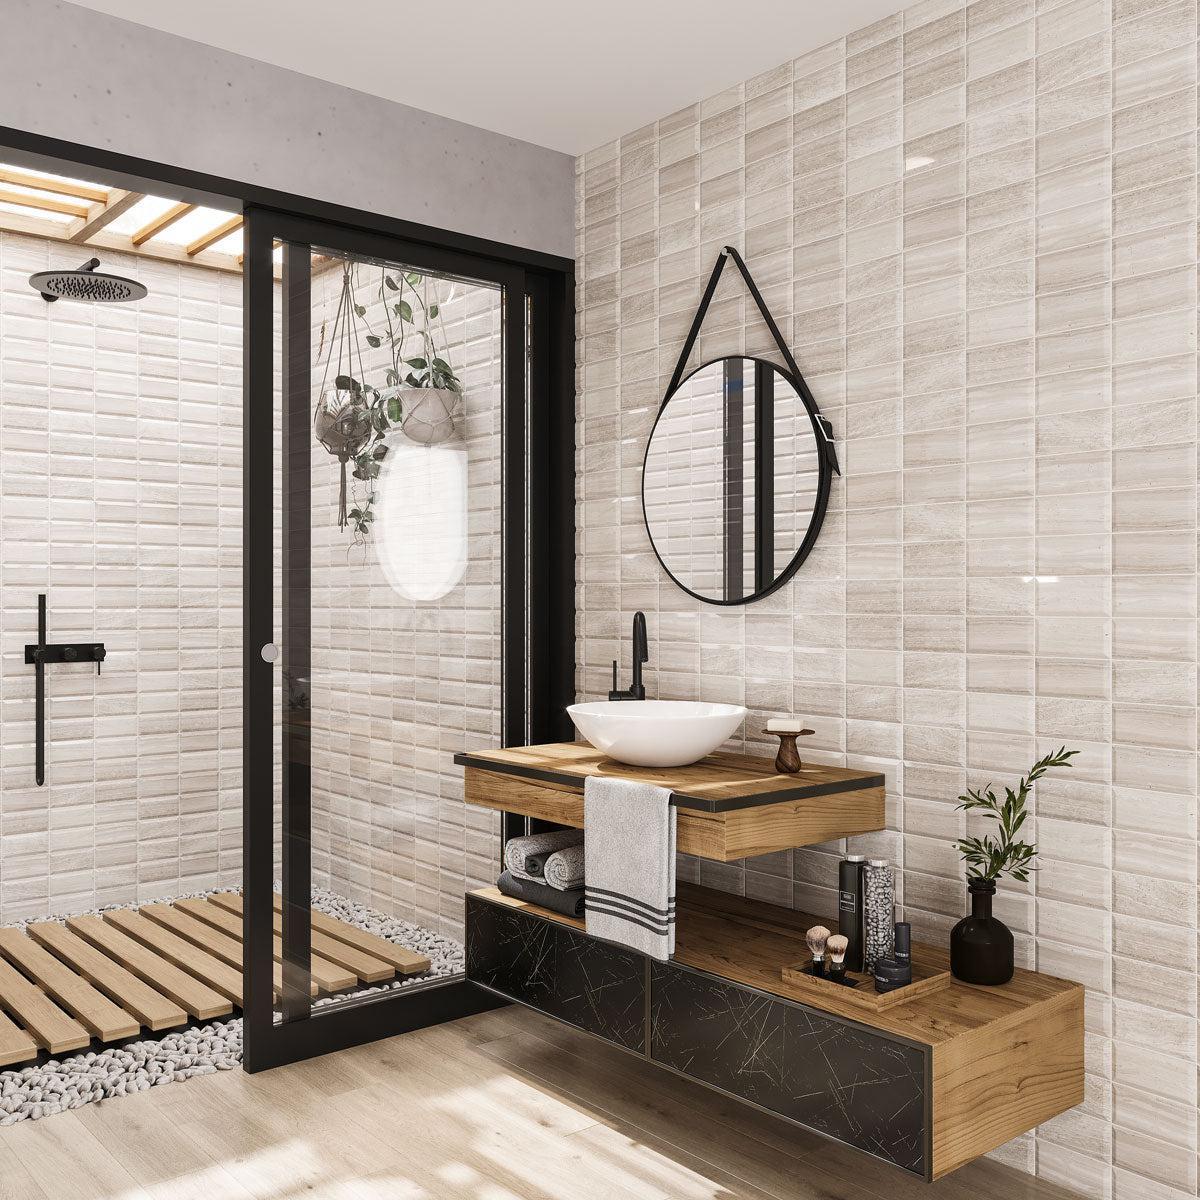 Spa style bathroom with natural wood look floors and marble subway tile walls